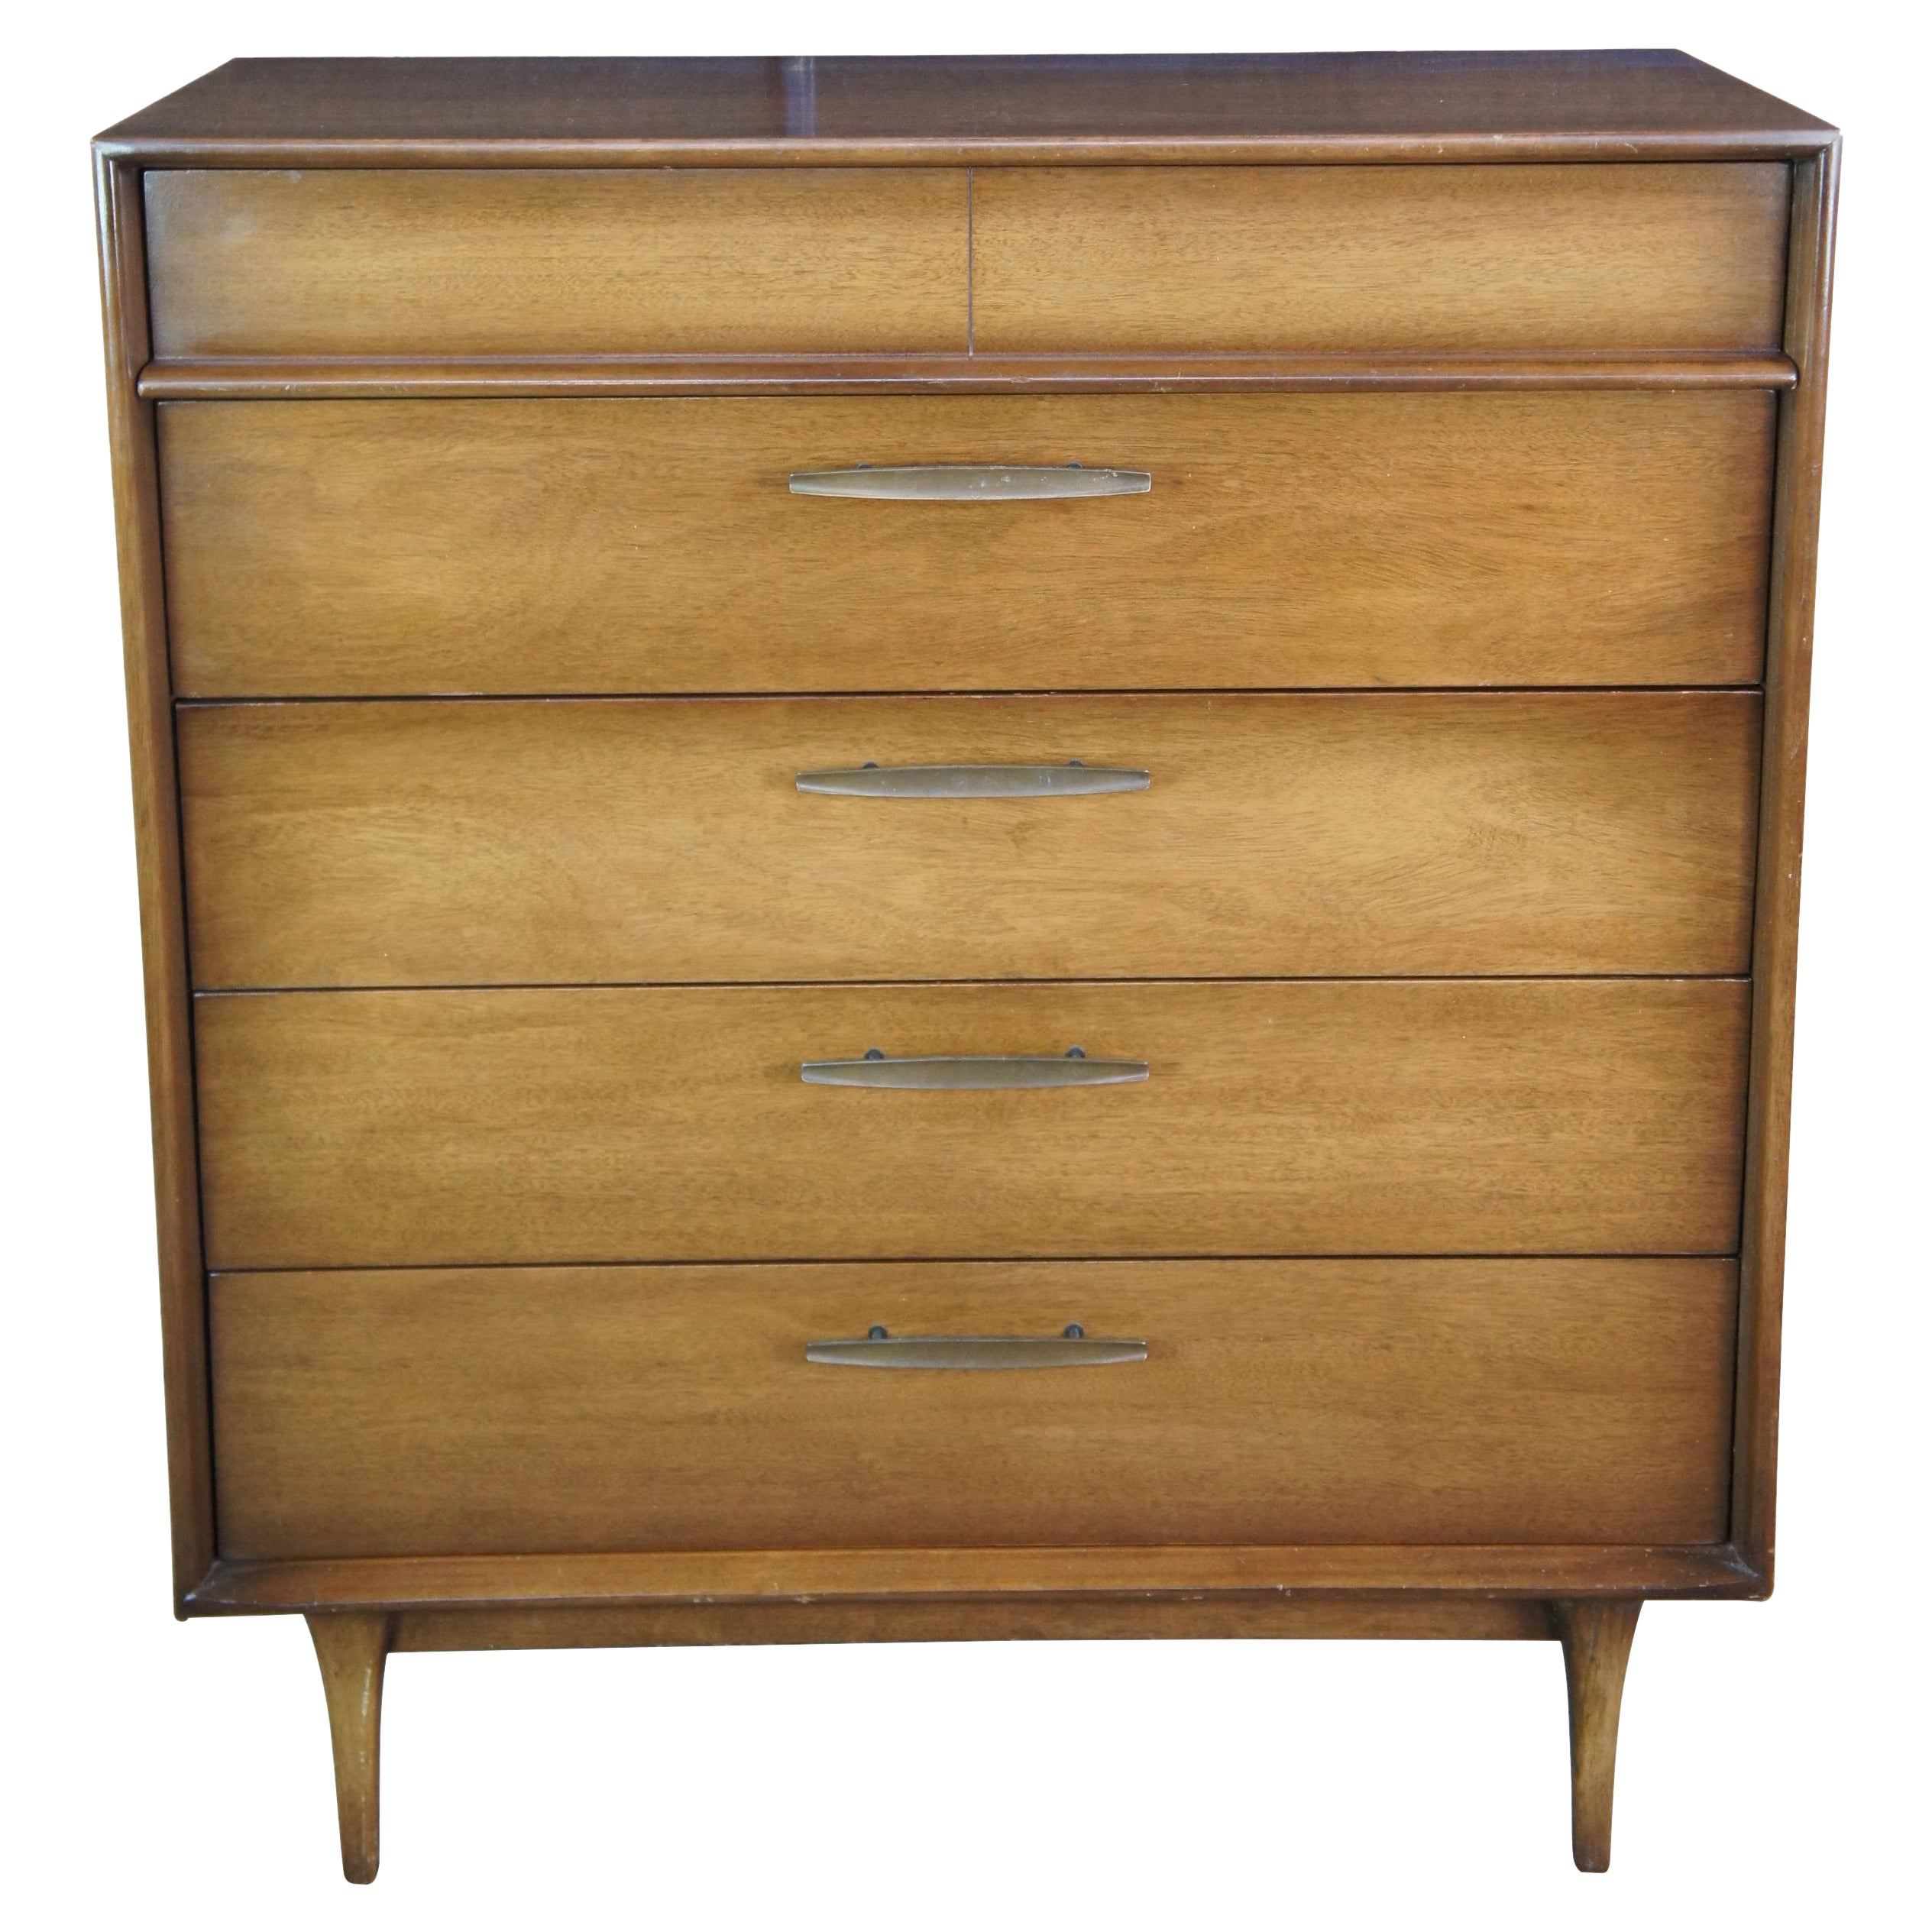 Mid-Century Modern Walnut Red Lion Table Co Tallboy Dresser Chest of Drawers